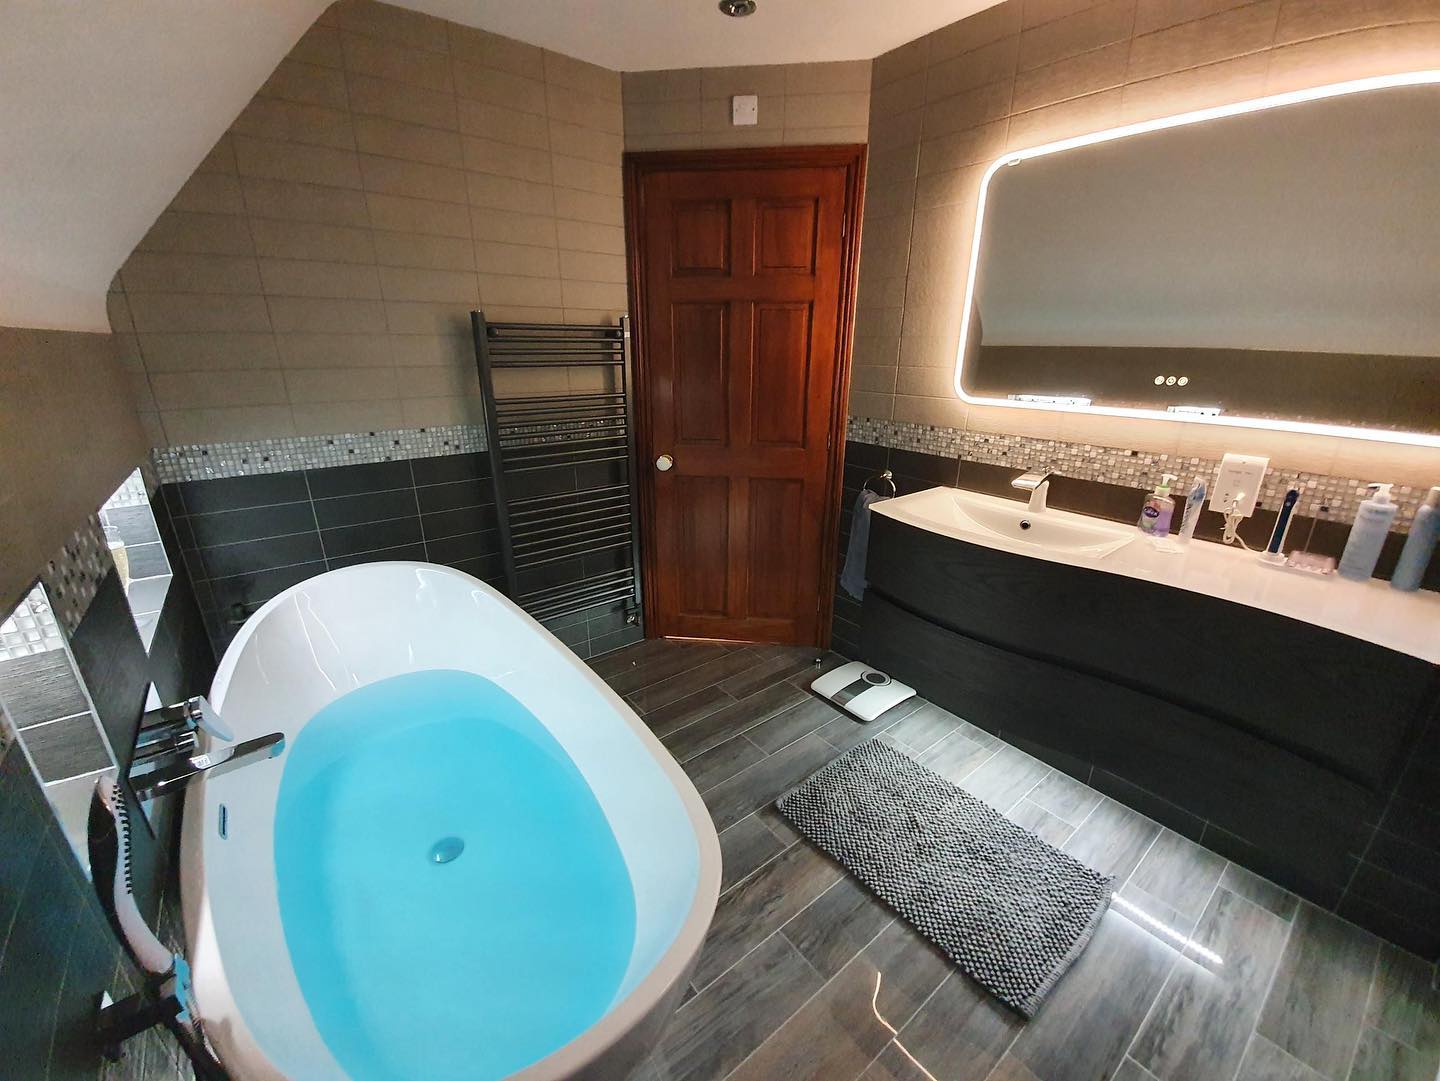 Luxurious modern bathroom with freestanding double ended bathtub